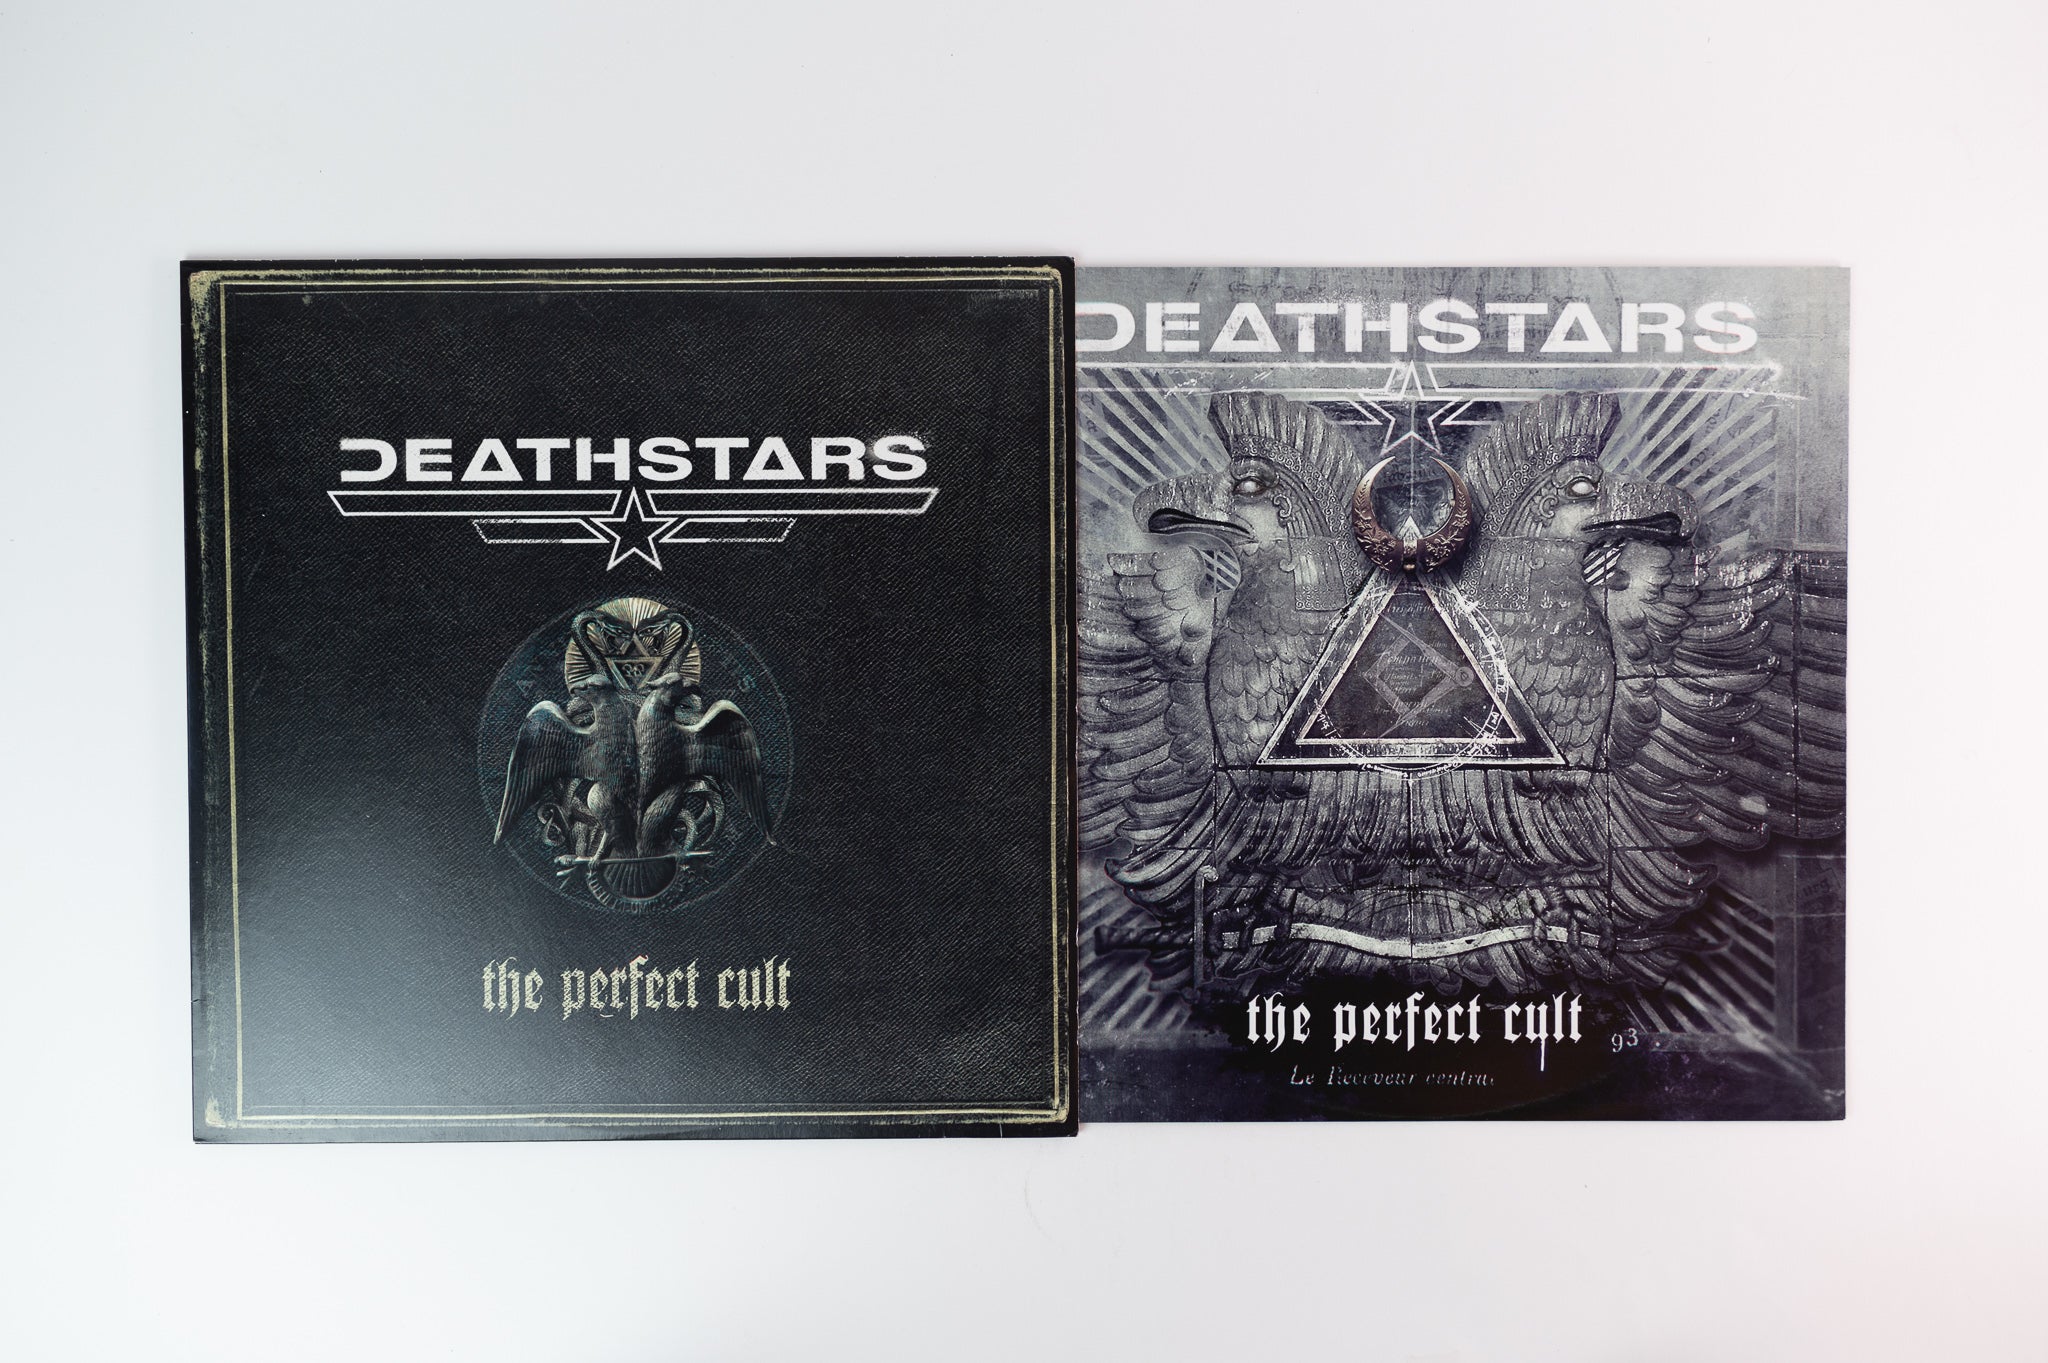 Deathstars - The Perfect Cult on Nuclear Blast Limited Green Vinyl